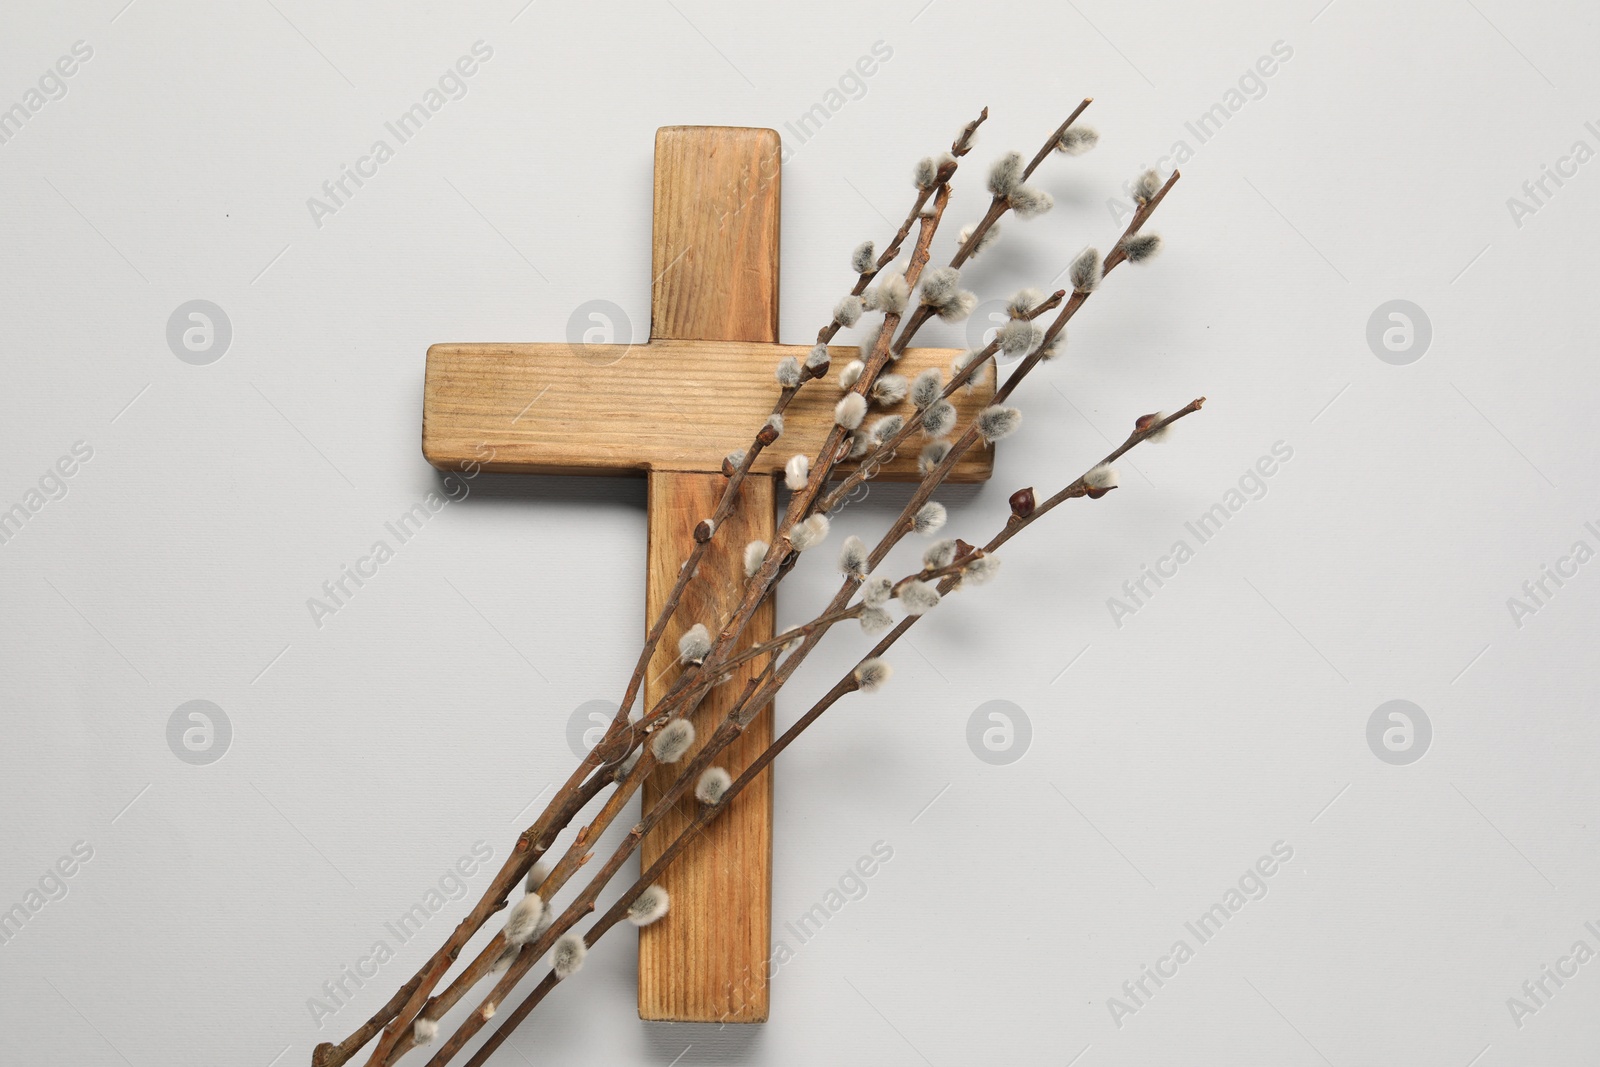 Photo of Wooden cross and willow branches on light grey background, top view. Easter attributes